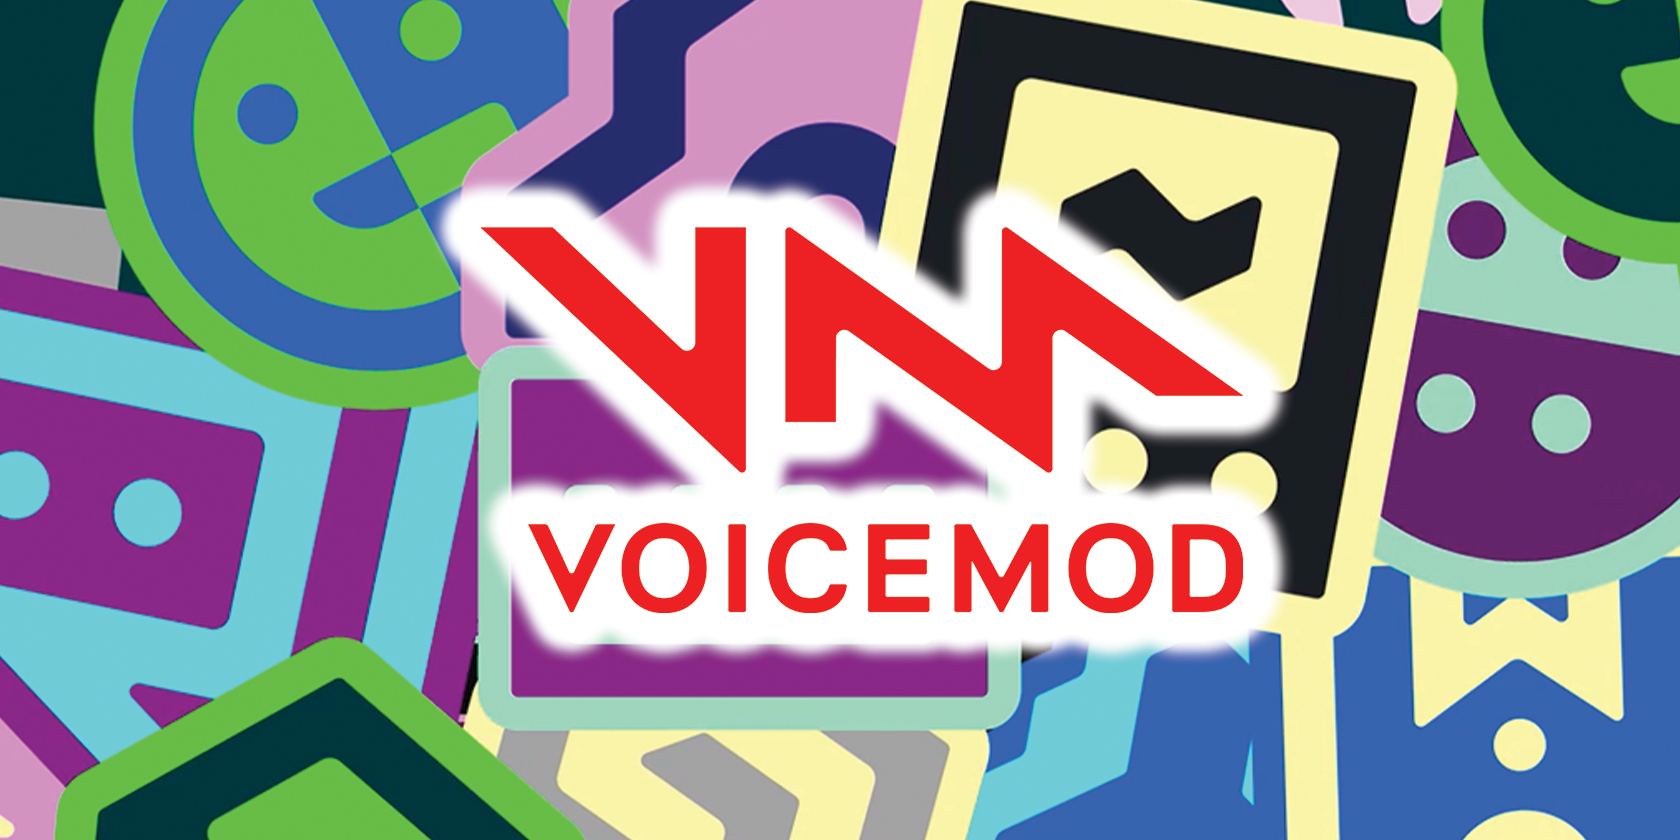 voicemod with twitch and discord logos